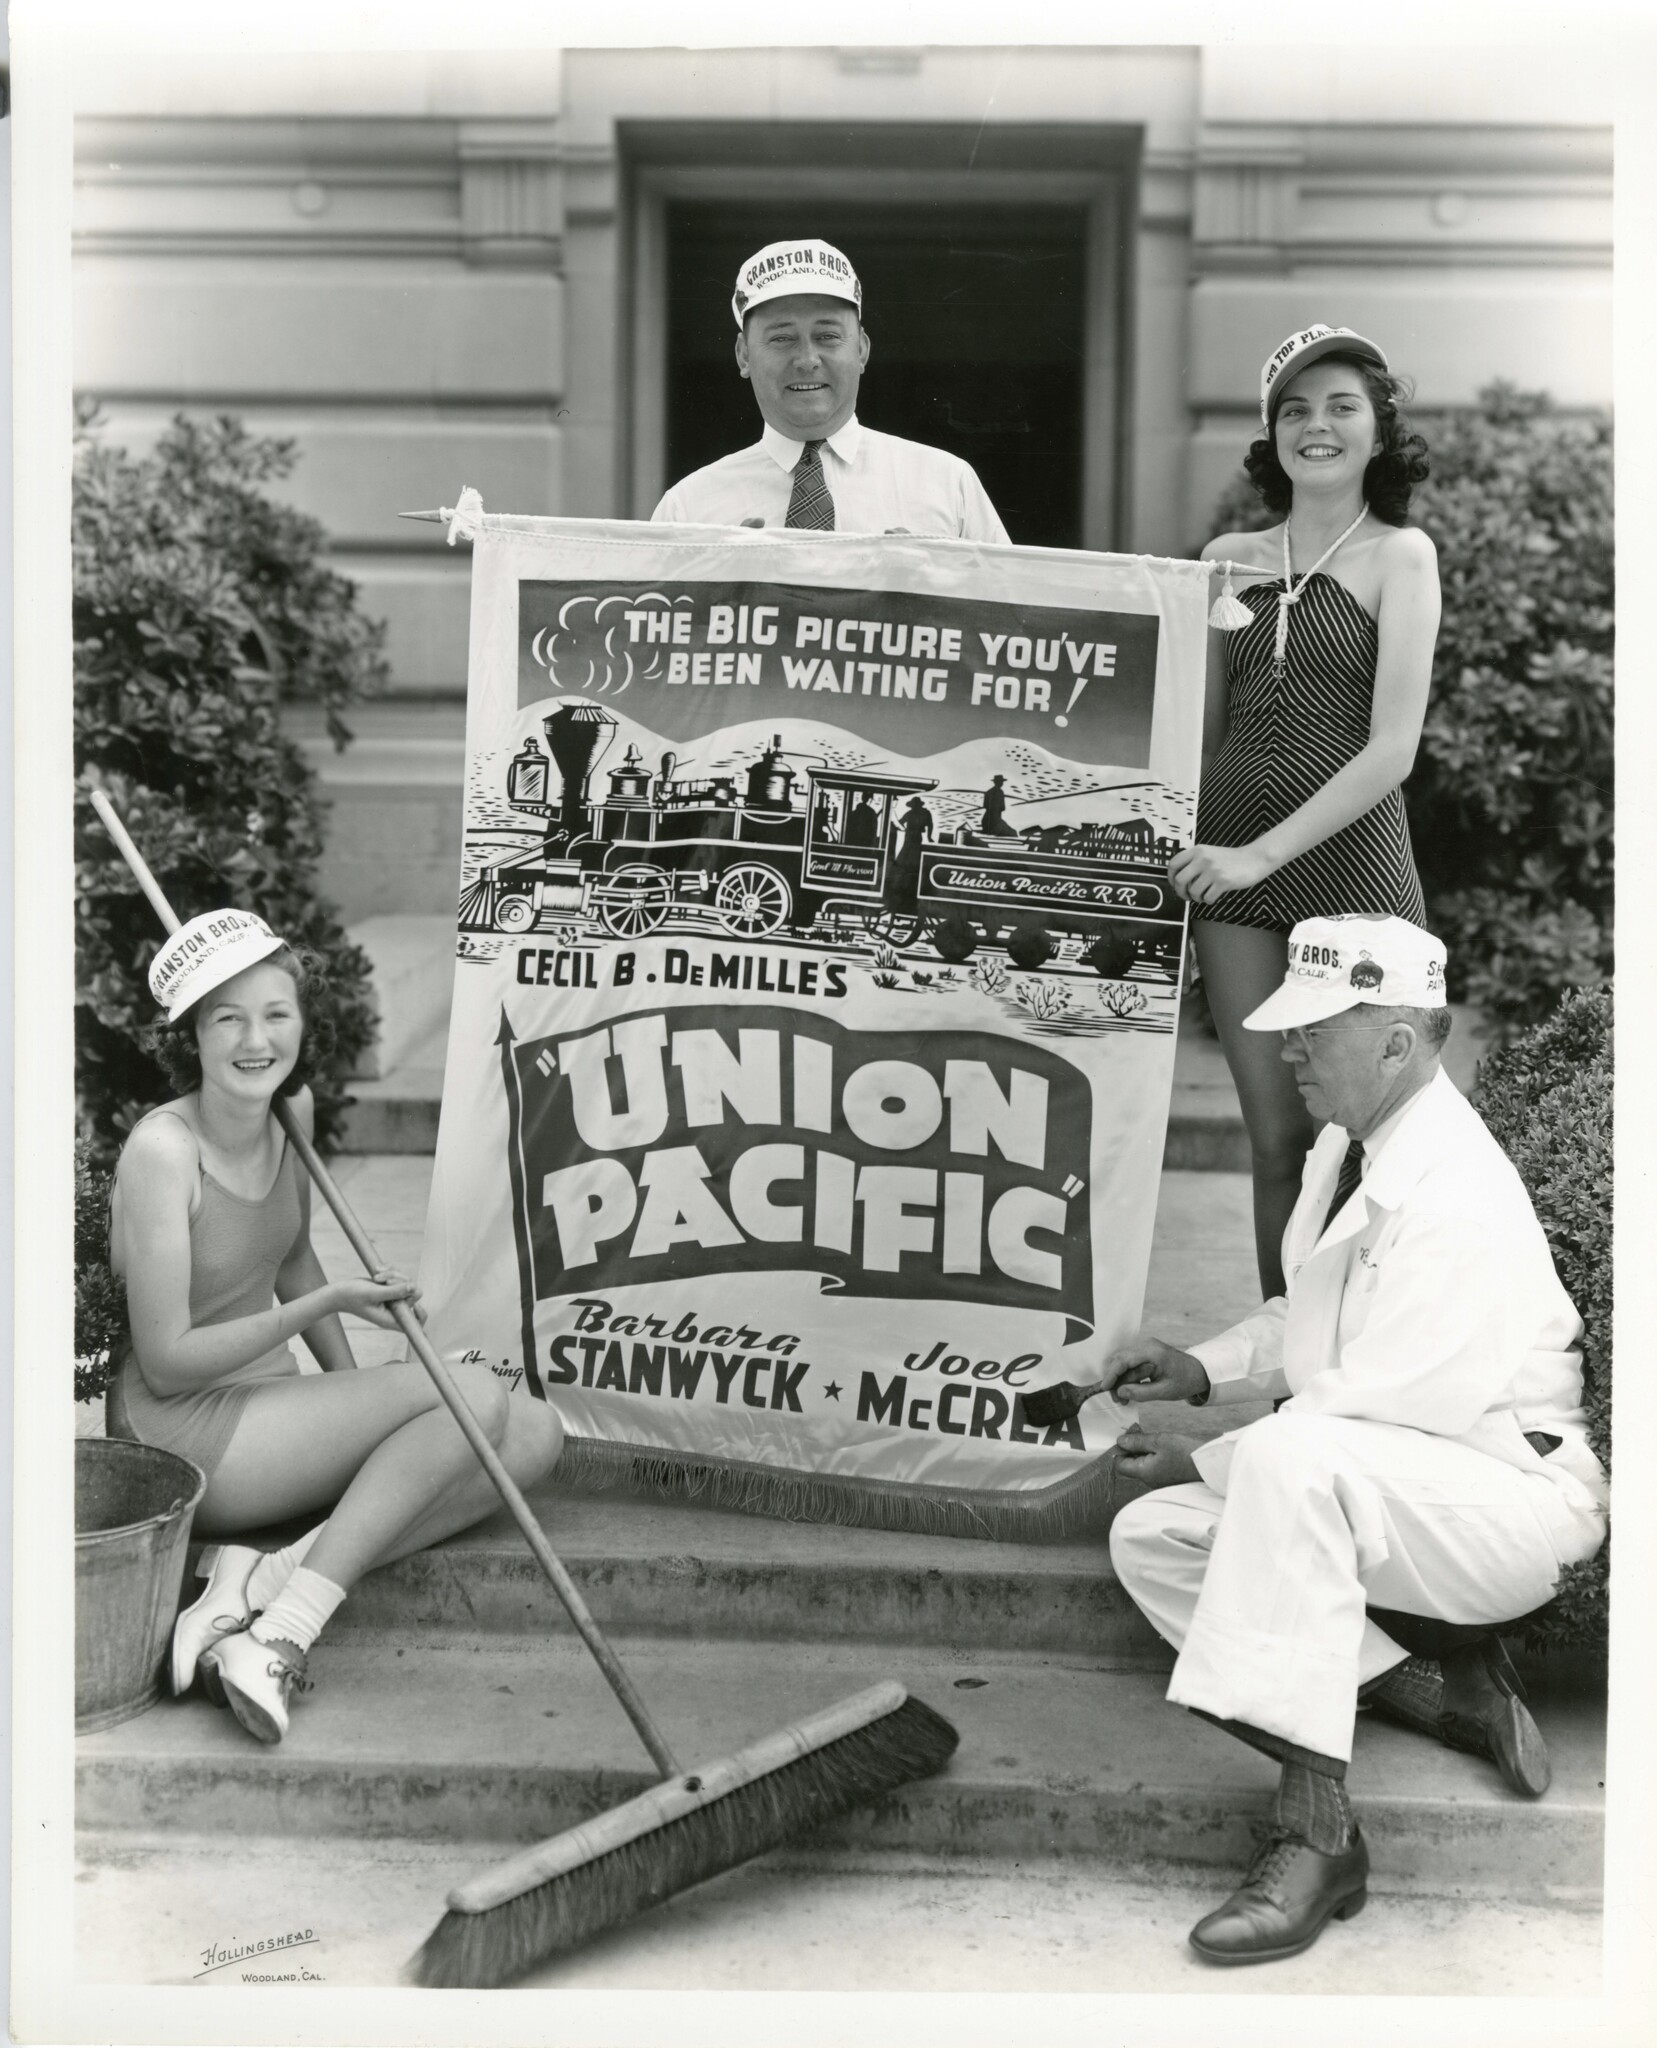 Two men and two women holding up a movie poster. One woman also holds a broom.